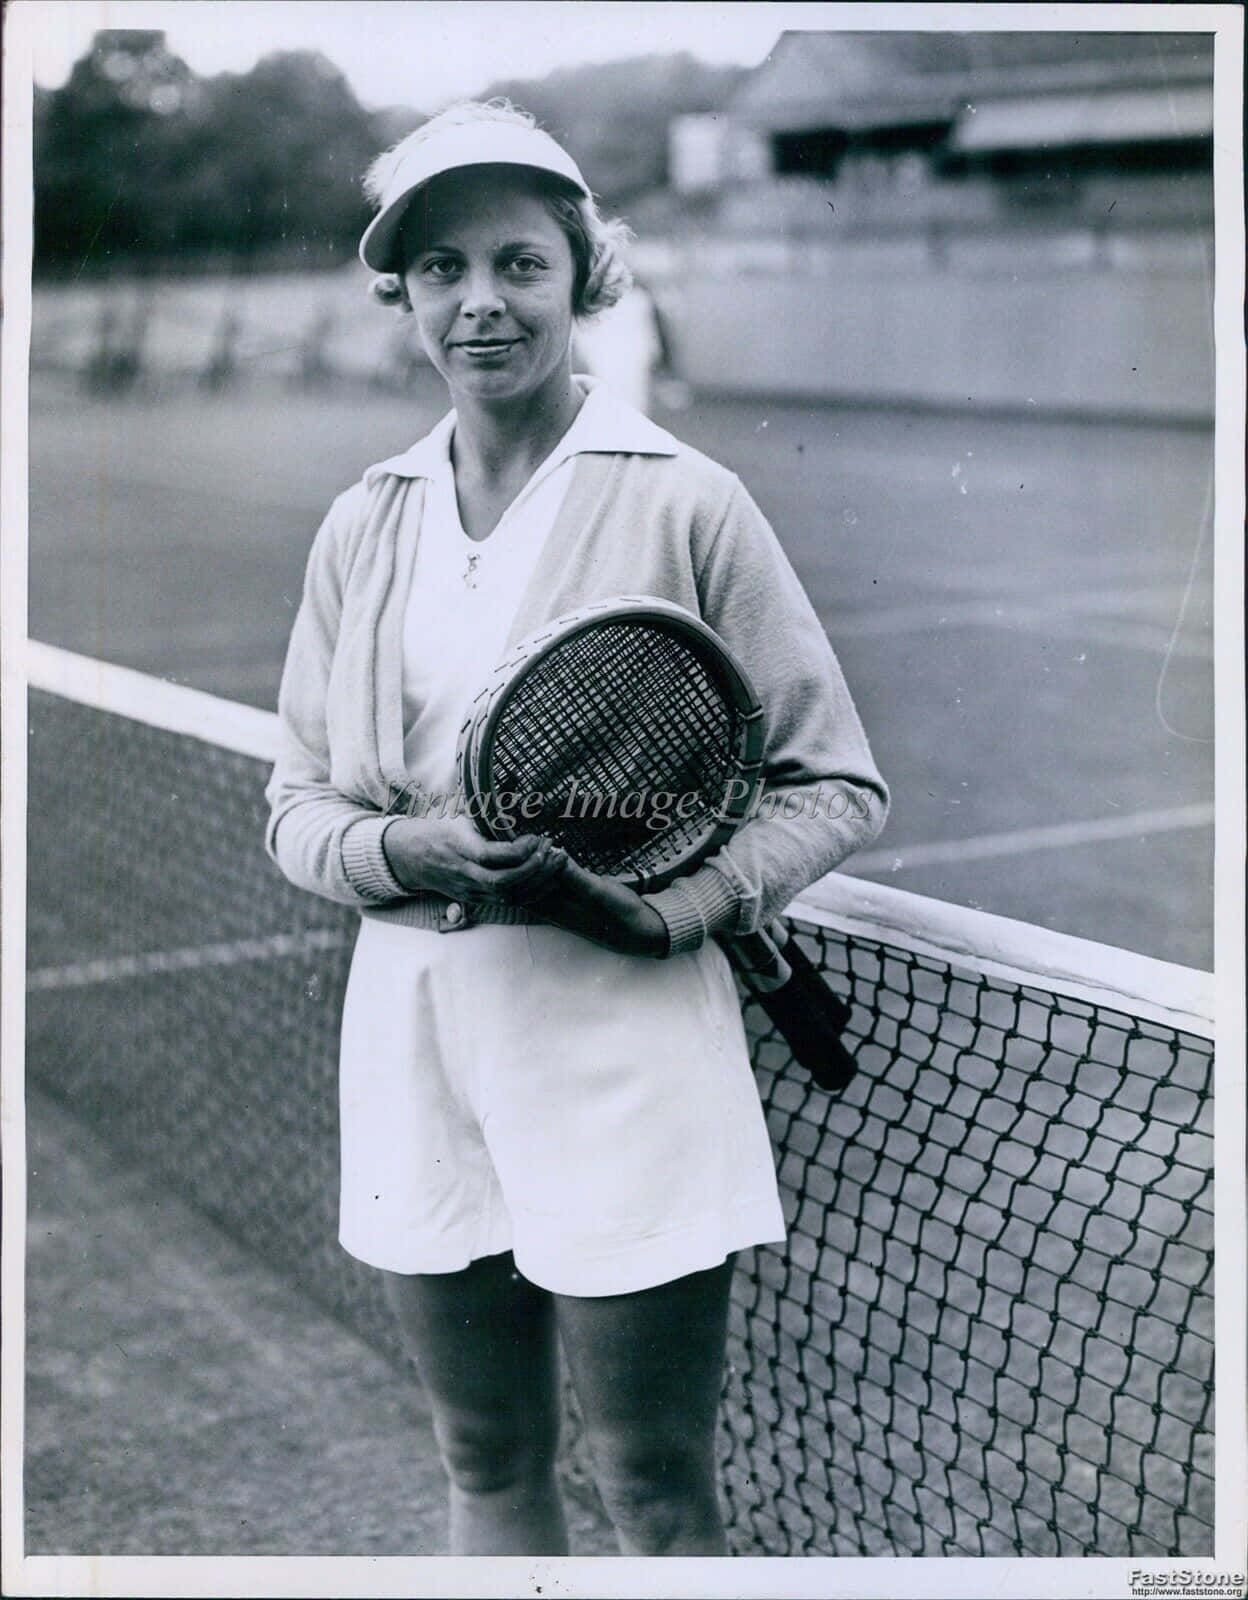 Iconic American tennis player, Alice Marble, in action on the tennis court. Wallpaper